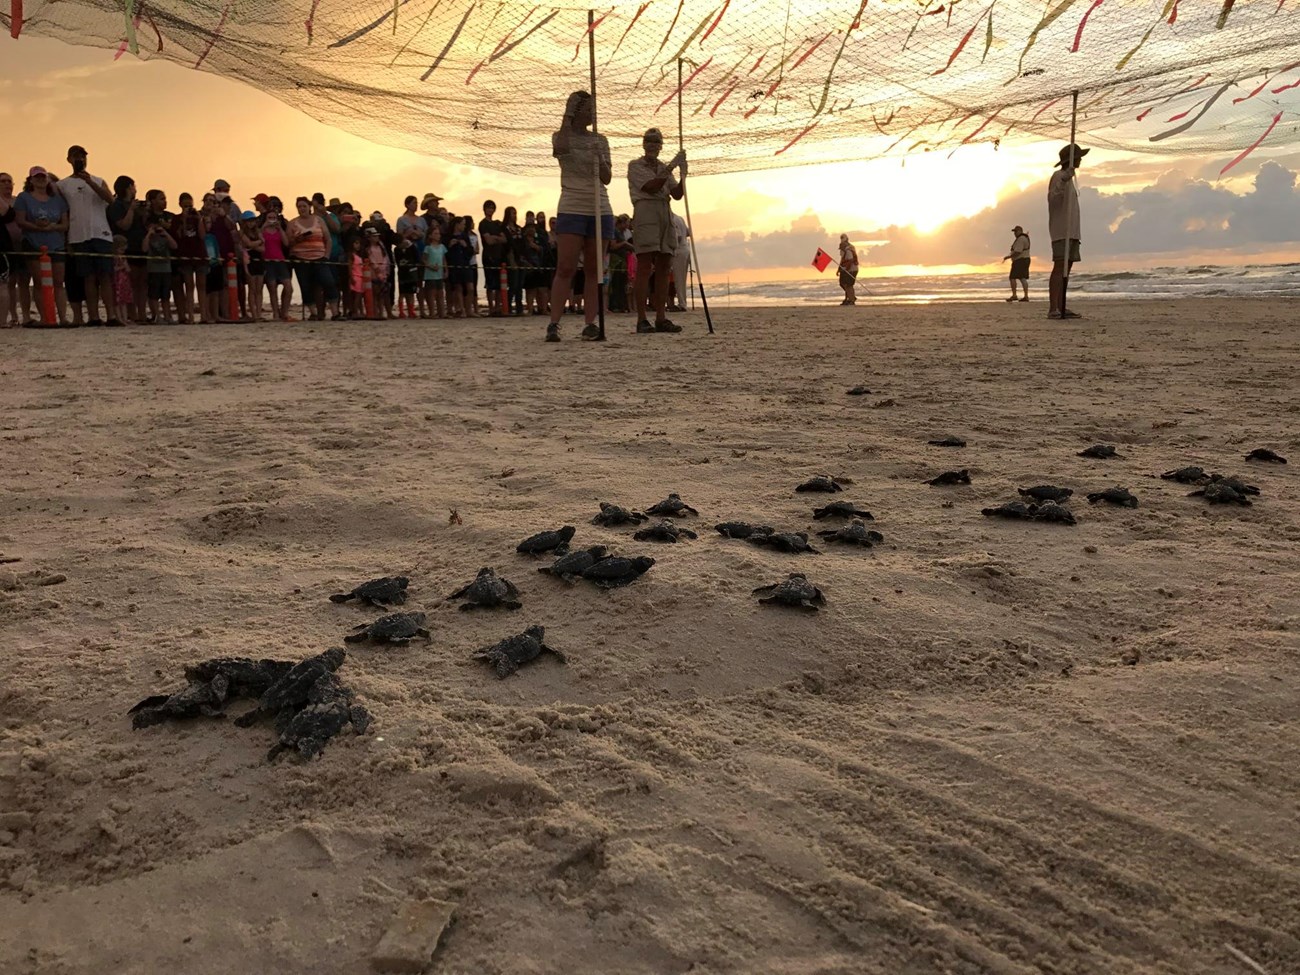 Volunteers and NPS staff holding netting over the beach at dawn while Kemp's ridley sea turtle hatchlings crawl underneath.